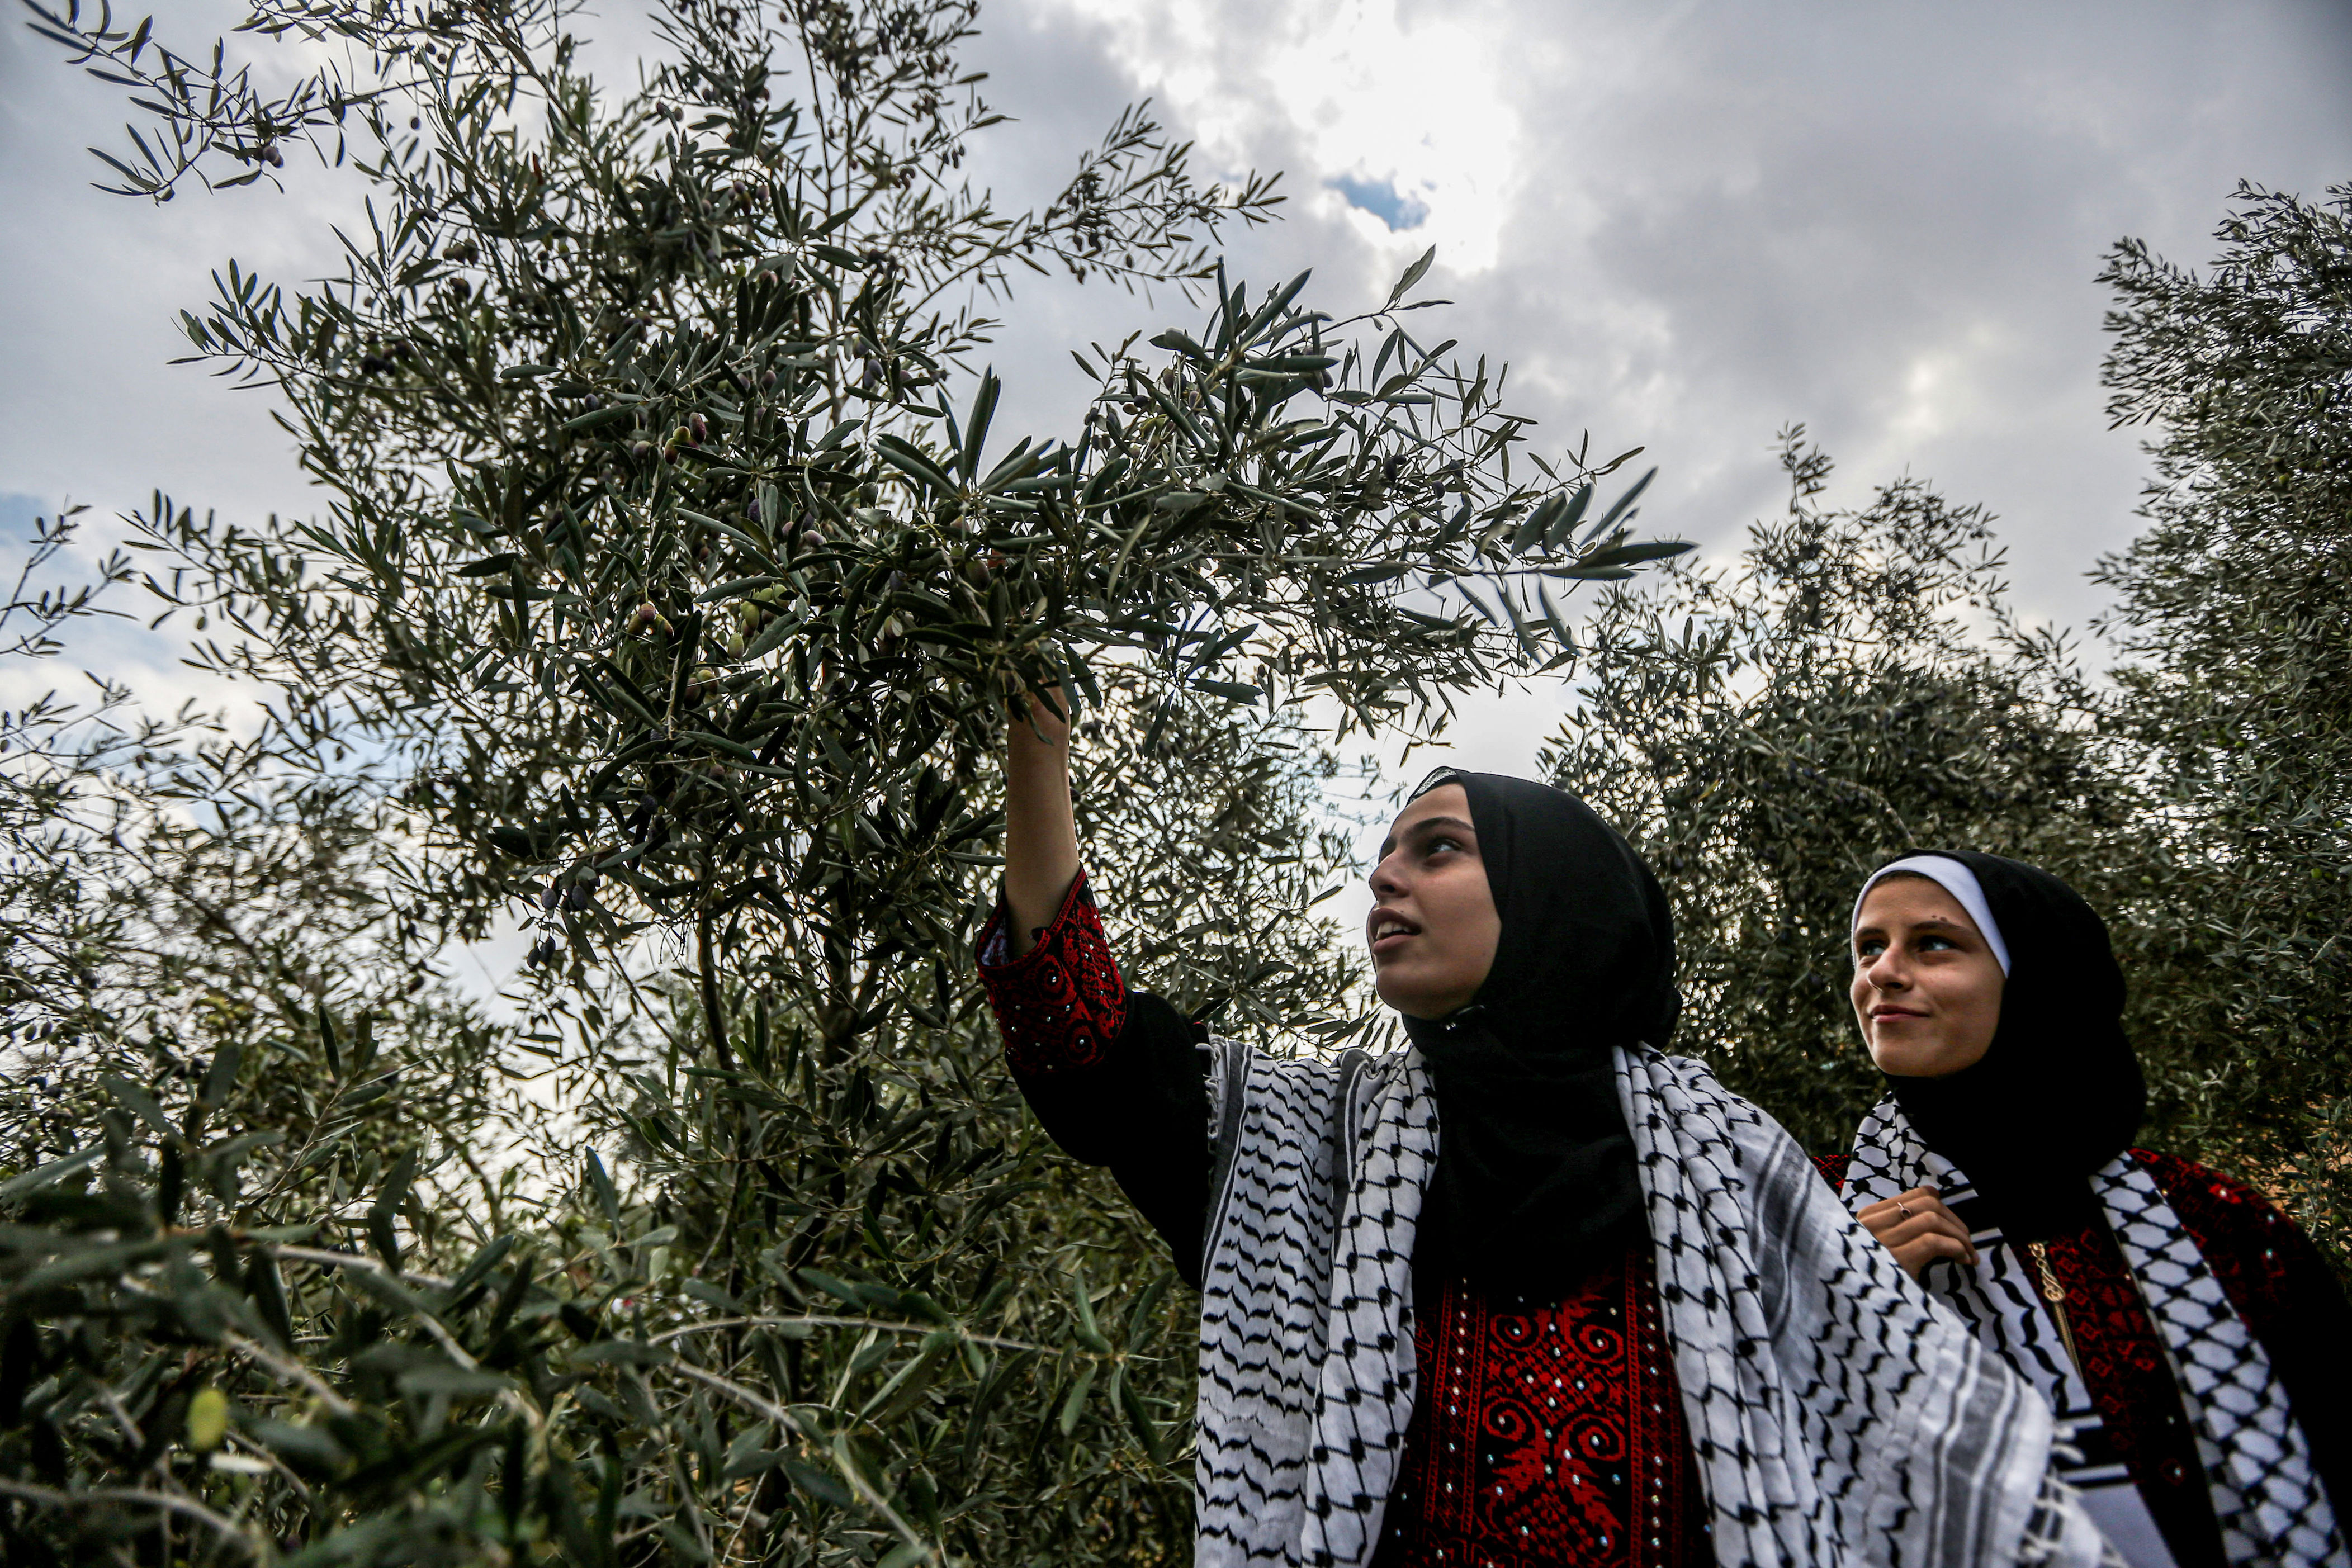 israel’s offensive is destroying gaza’s ability to grow its own food